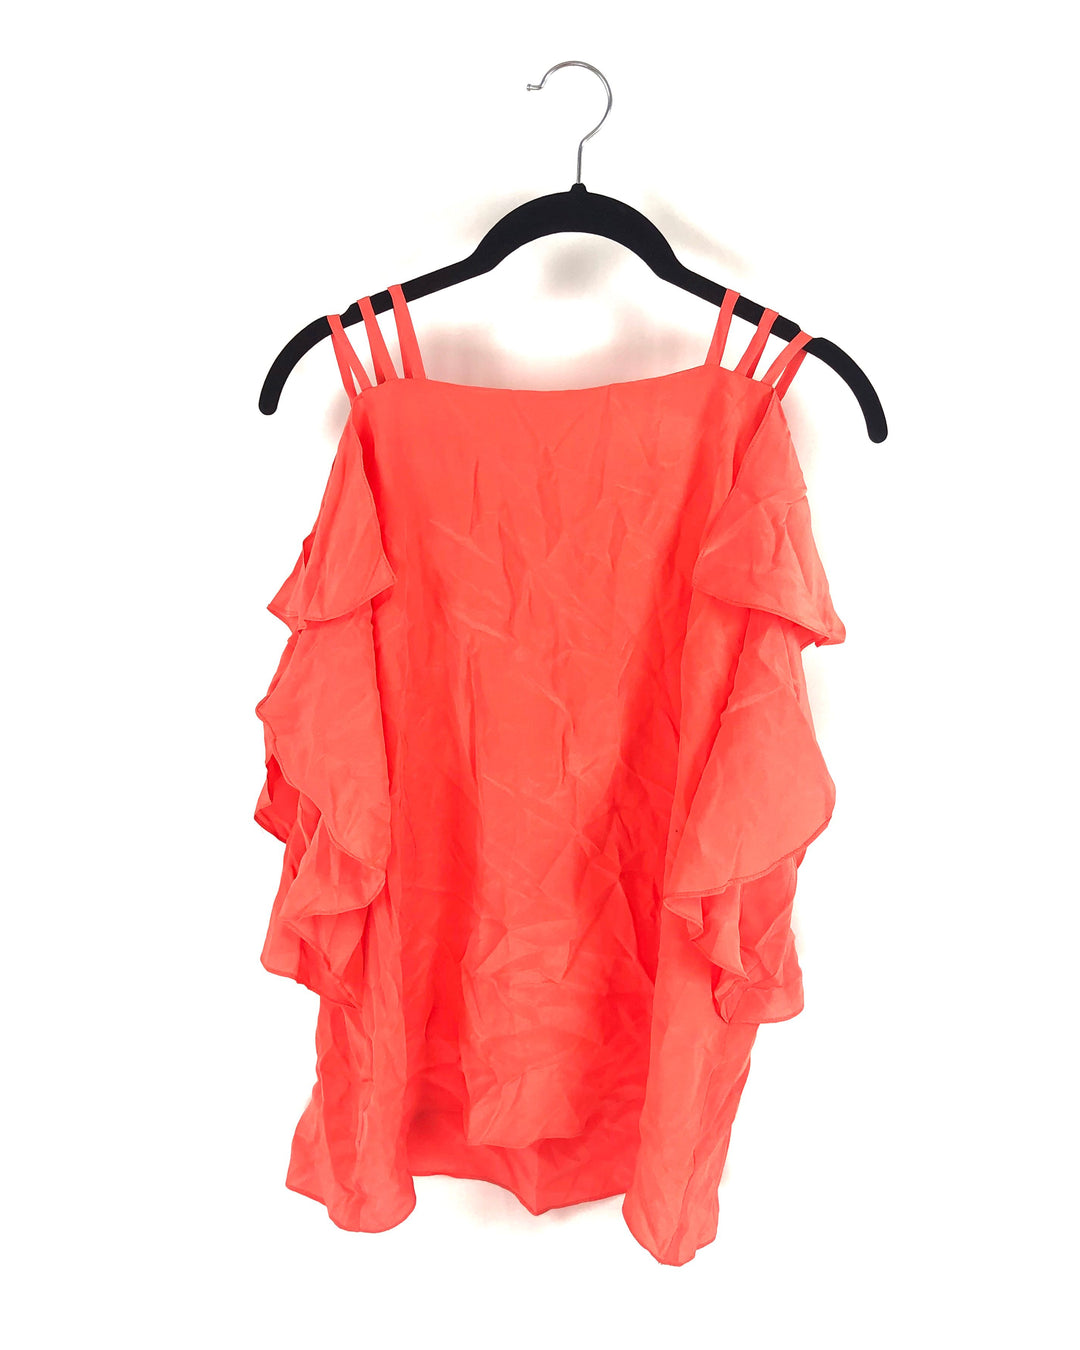 Coral Tank Top - Small